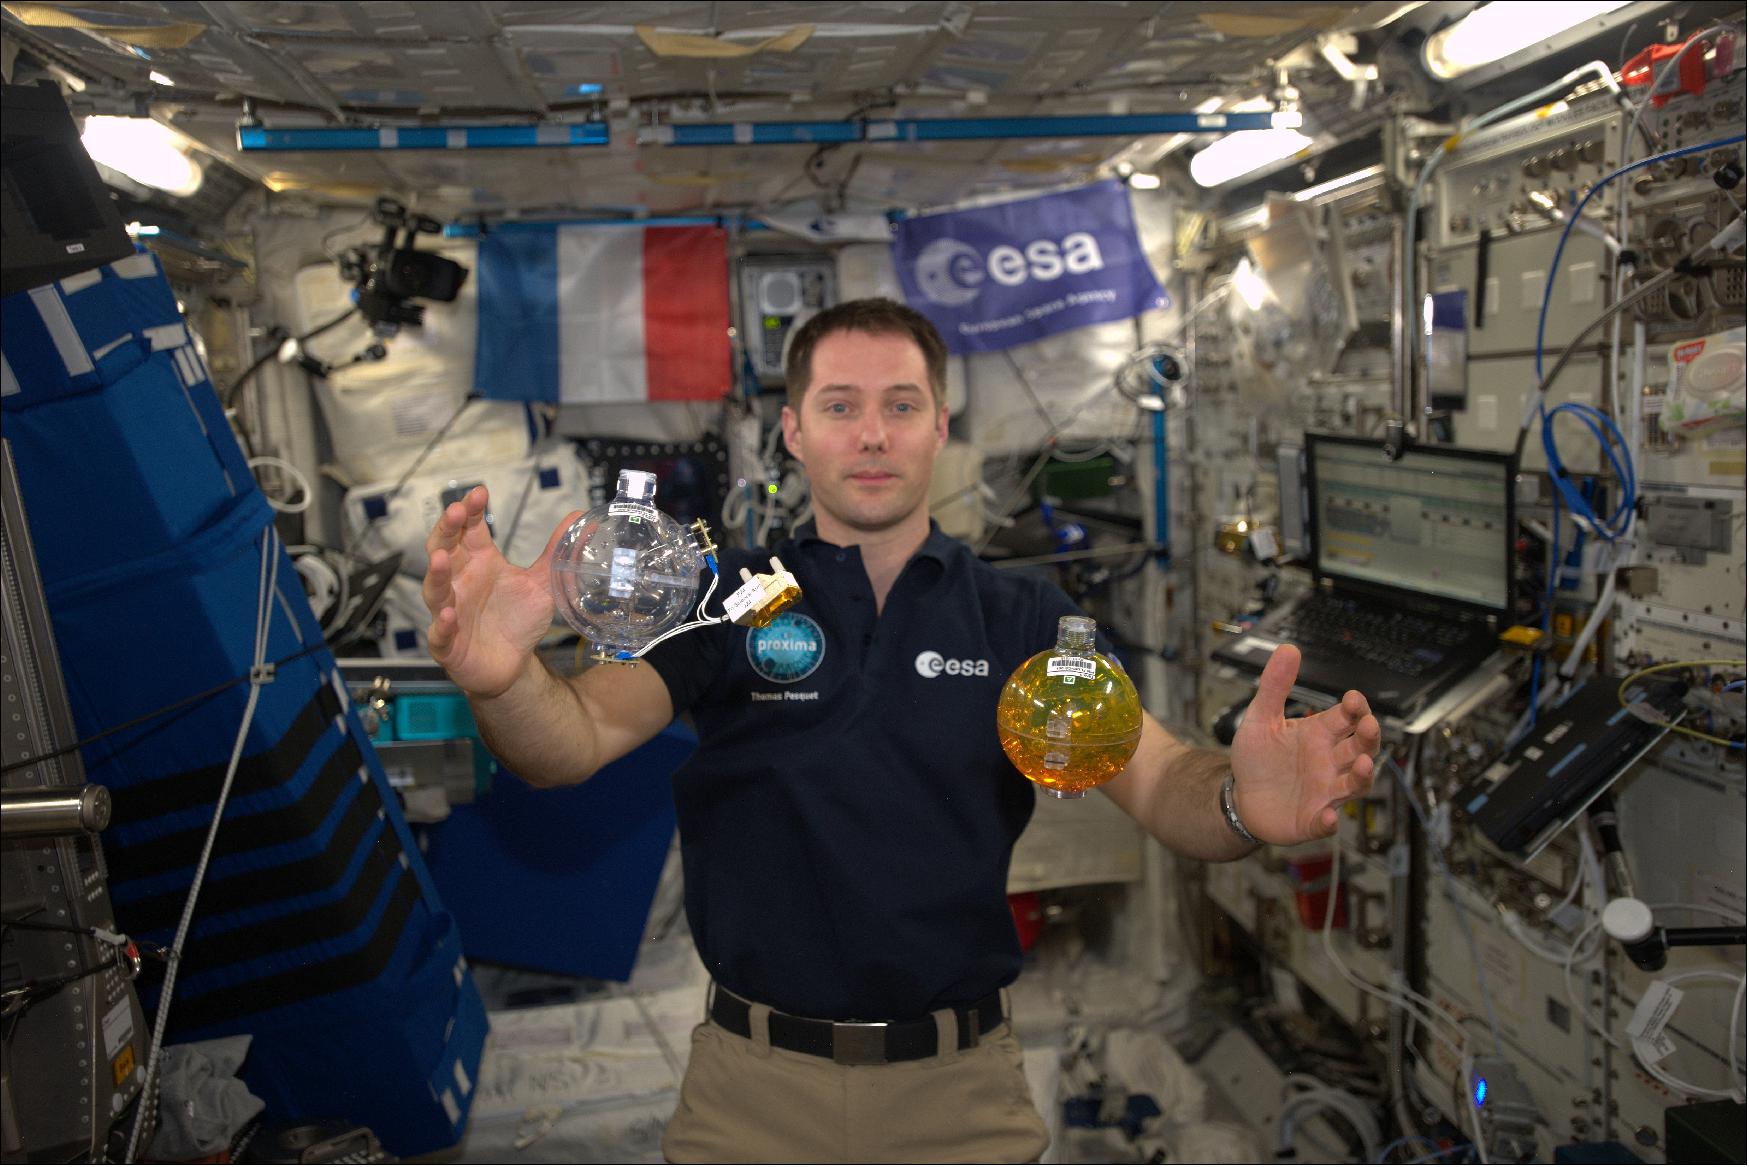 Figure 88: ESA astronaut Thomas Pesquet works on the Fluidics experiment inside the Space Station's European Columbus laboratory. - Posting on social media, Thomas wrote: "The spheres for the Fluidics experiment. One liquid is to help get every drop of fuel out of satellite fuel-tanks, the other liquid is to understand surface turbulence in liquids. By looking at surface turbulence without gravity interfering researchers can single out what influences behavior that forms ripples. This could help us better understand ocean currents and wave formation on Earth"(image credit: ESA/NASA)